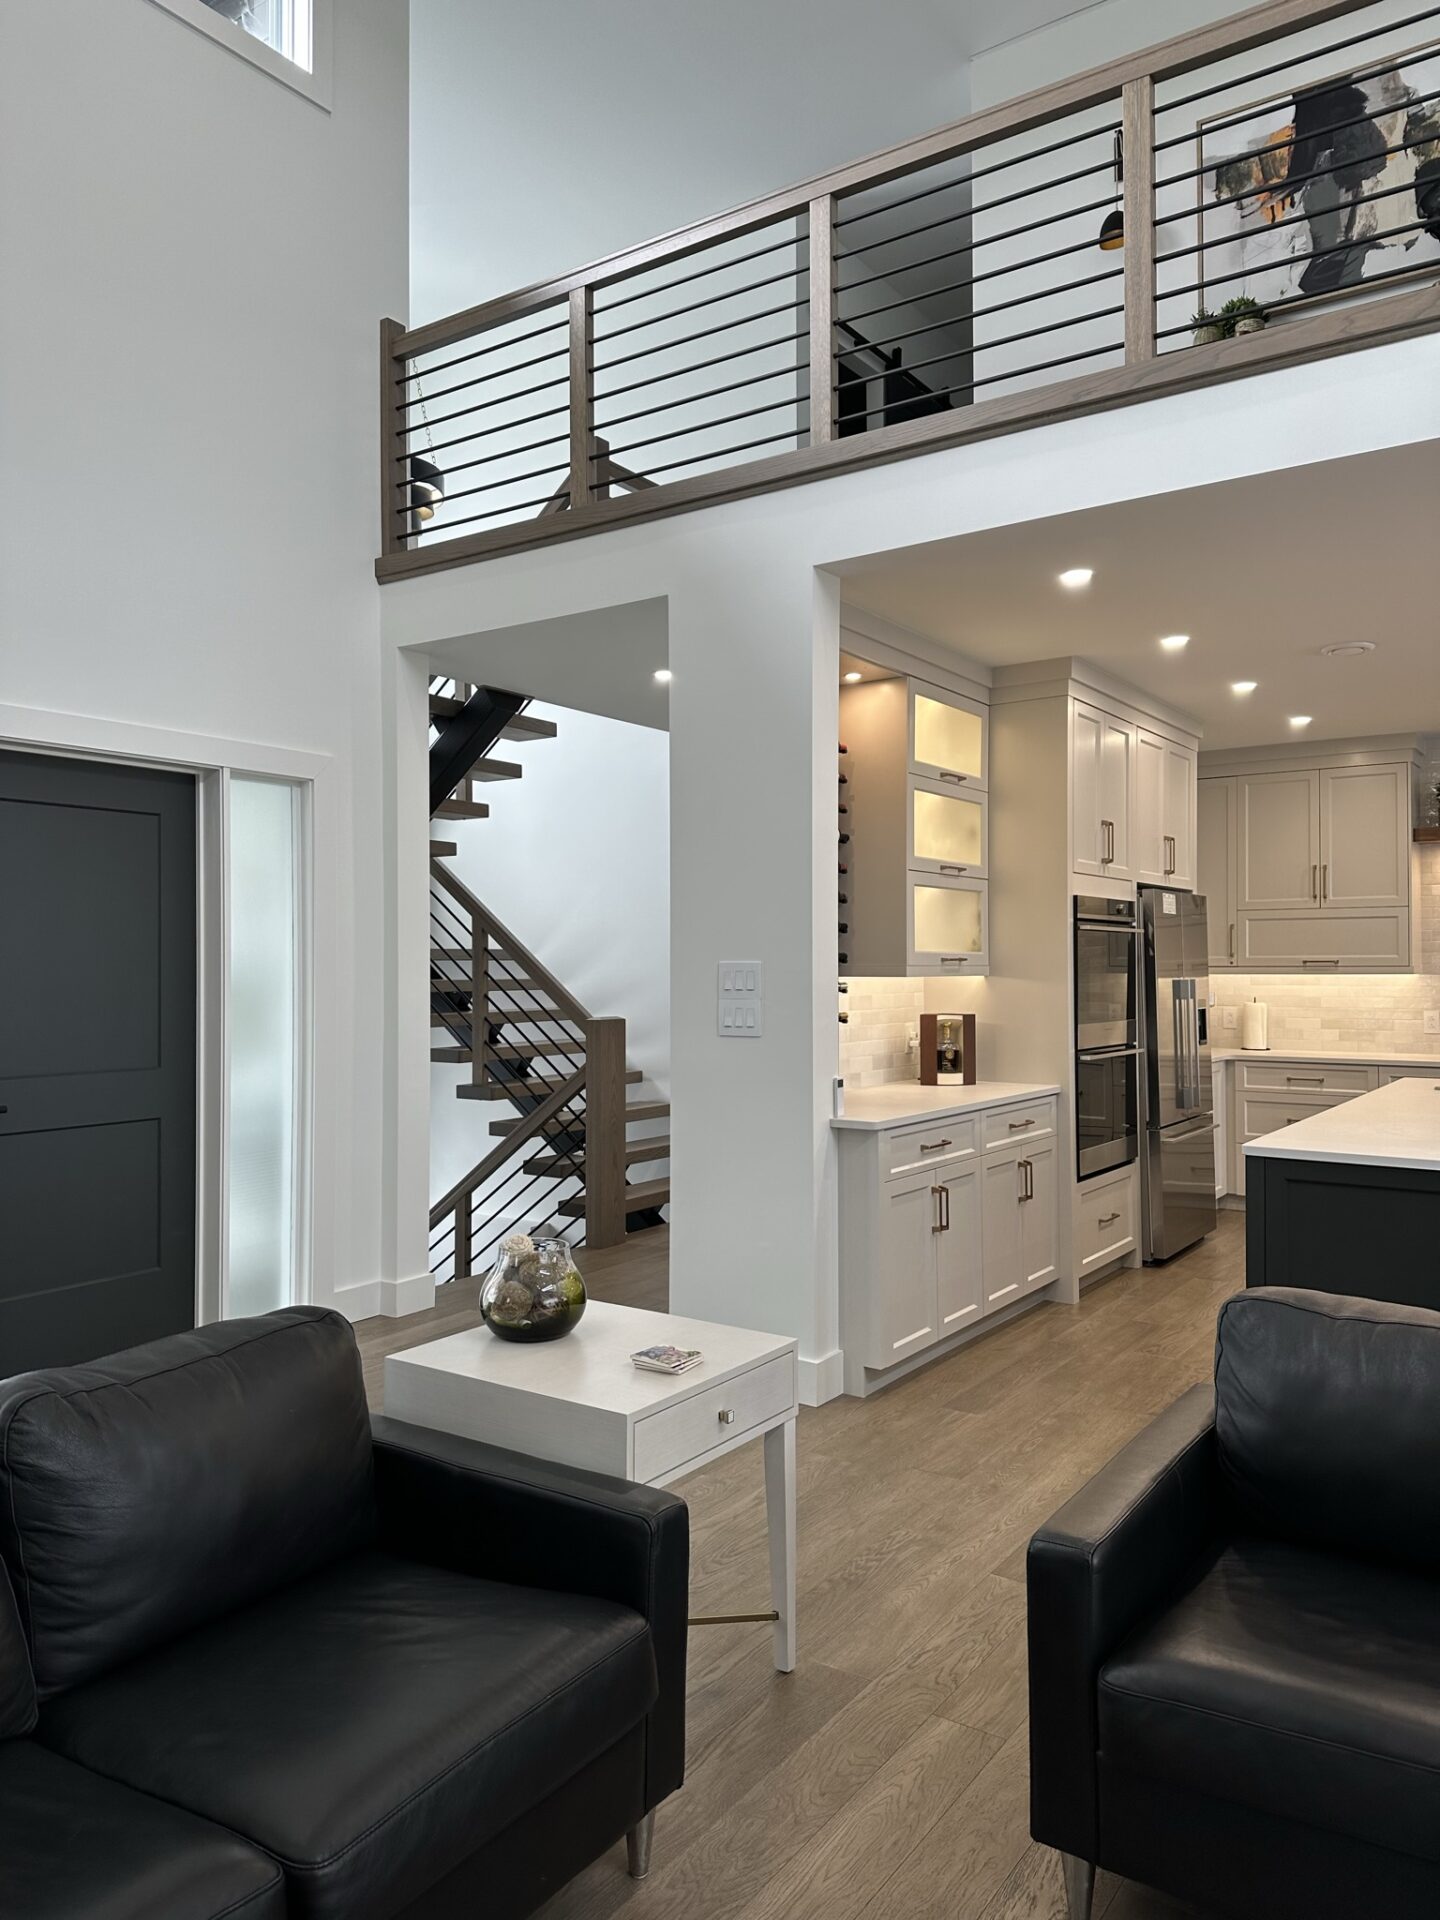 A modern interior with a sitting area, staircase, upper-level hallway with railing, and kitchen with white cabinets and stainless steel appliances.